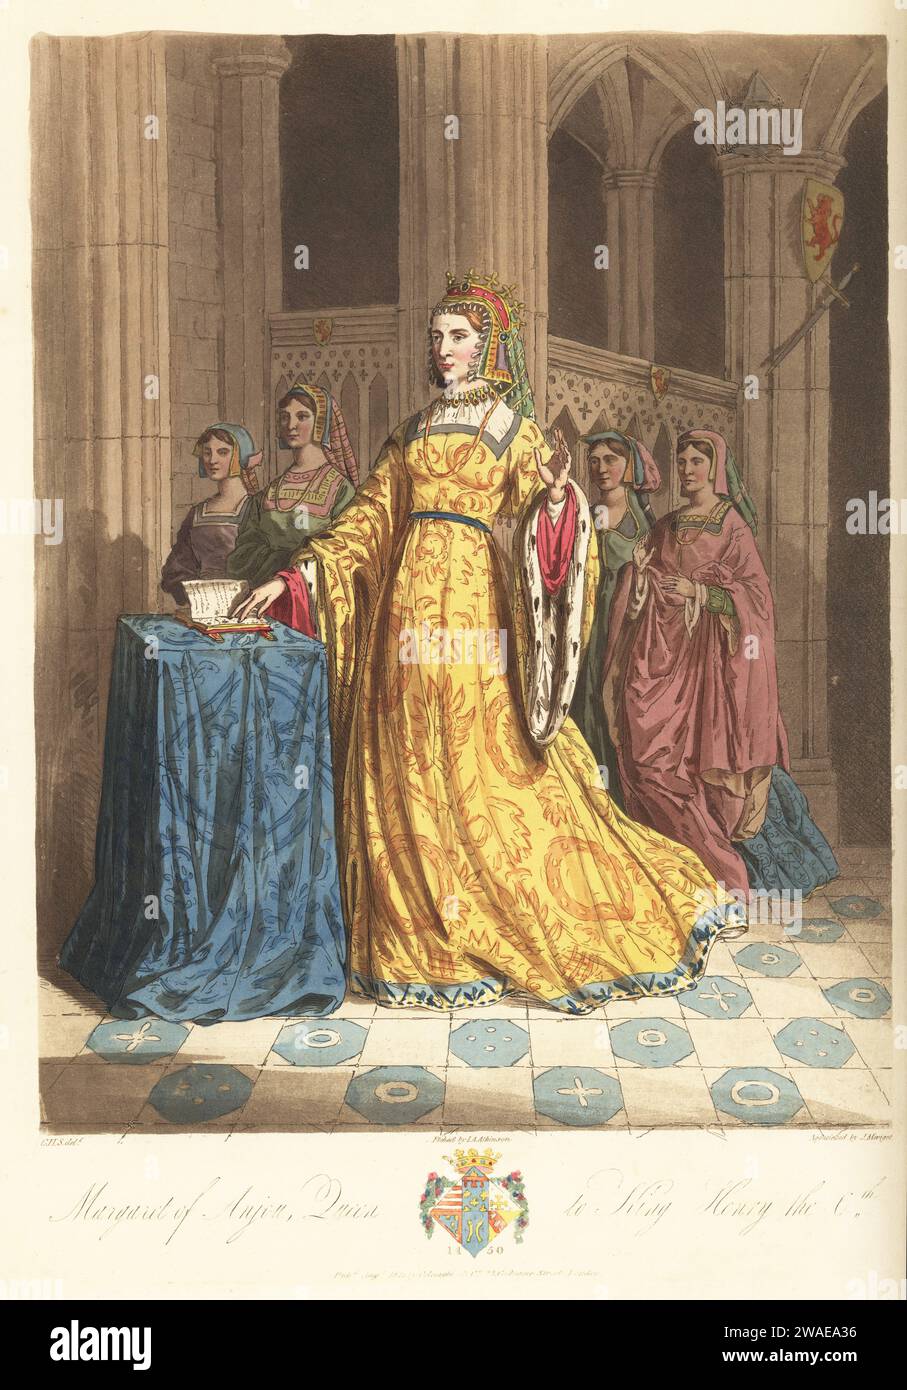 Margaret of Anjou, Queen of King Henry VI of England, 1450. In coronet headdress and veil studded with pearls, gown in cloth of gold, hanging sleeves lined with ermine. Attended by several ladies of the court in gable headdresses in a cathedral. Adapted from the tapestry in St. Mary's Guildhall, Coventry. Handcoloured copperplate engraving etched by John Augustus Atkinson, aquatinted by Robert Havell, after an illustration by Charles Hamilton Smith from his own Selections of Ancient Costume of Great Britain and Ireland, Colnaghi and Co., London, 1814. Stock Photo